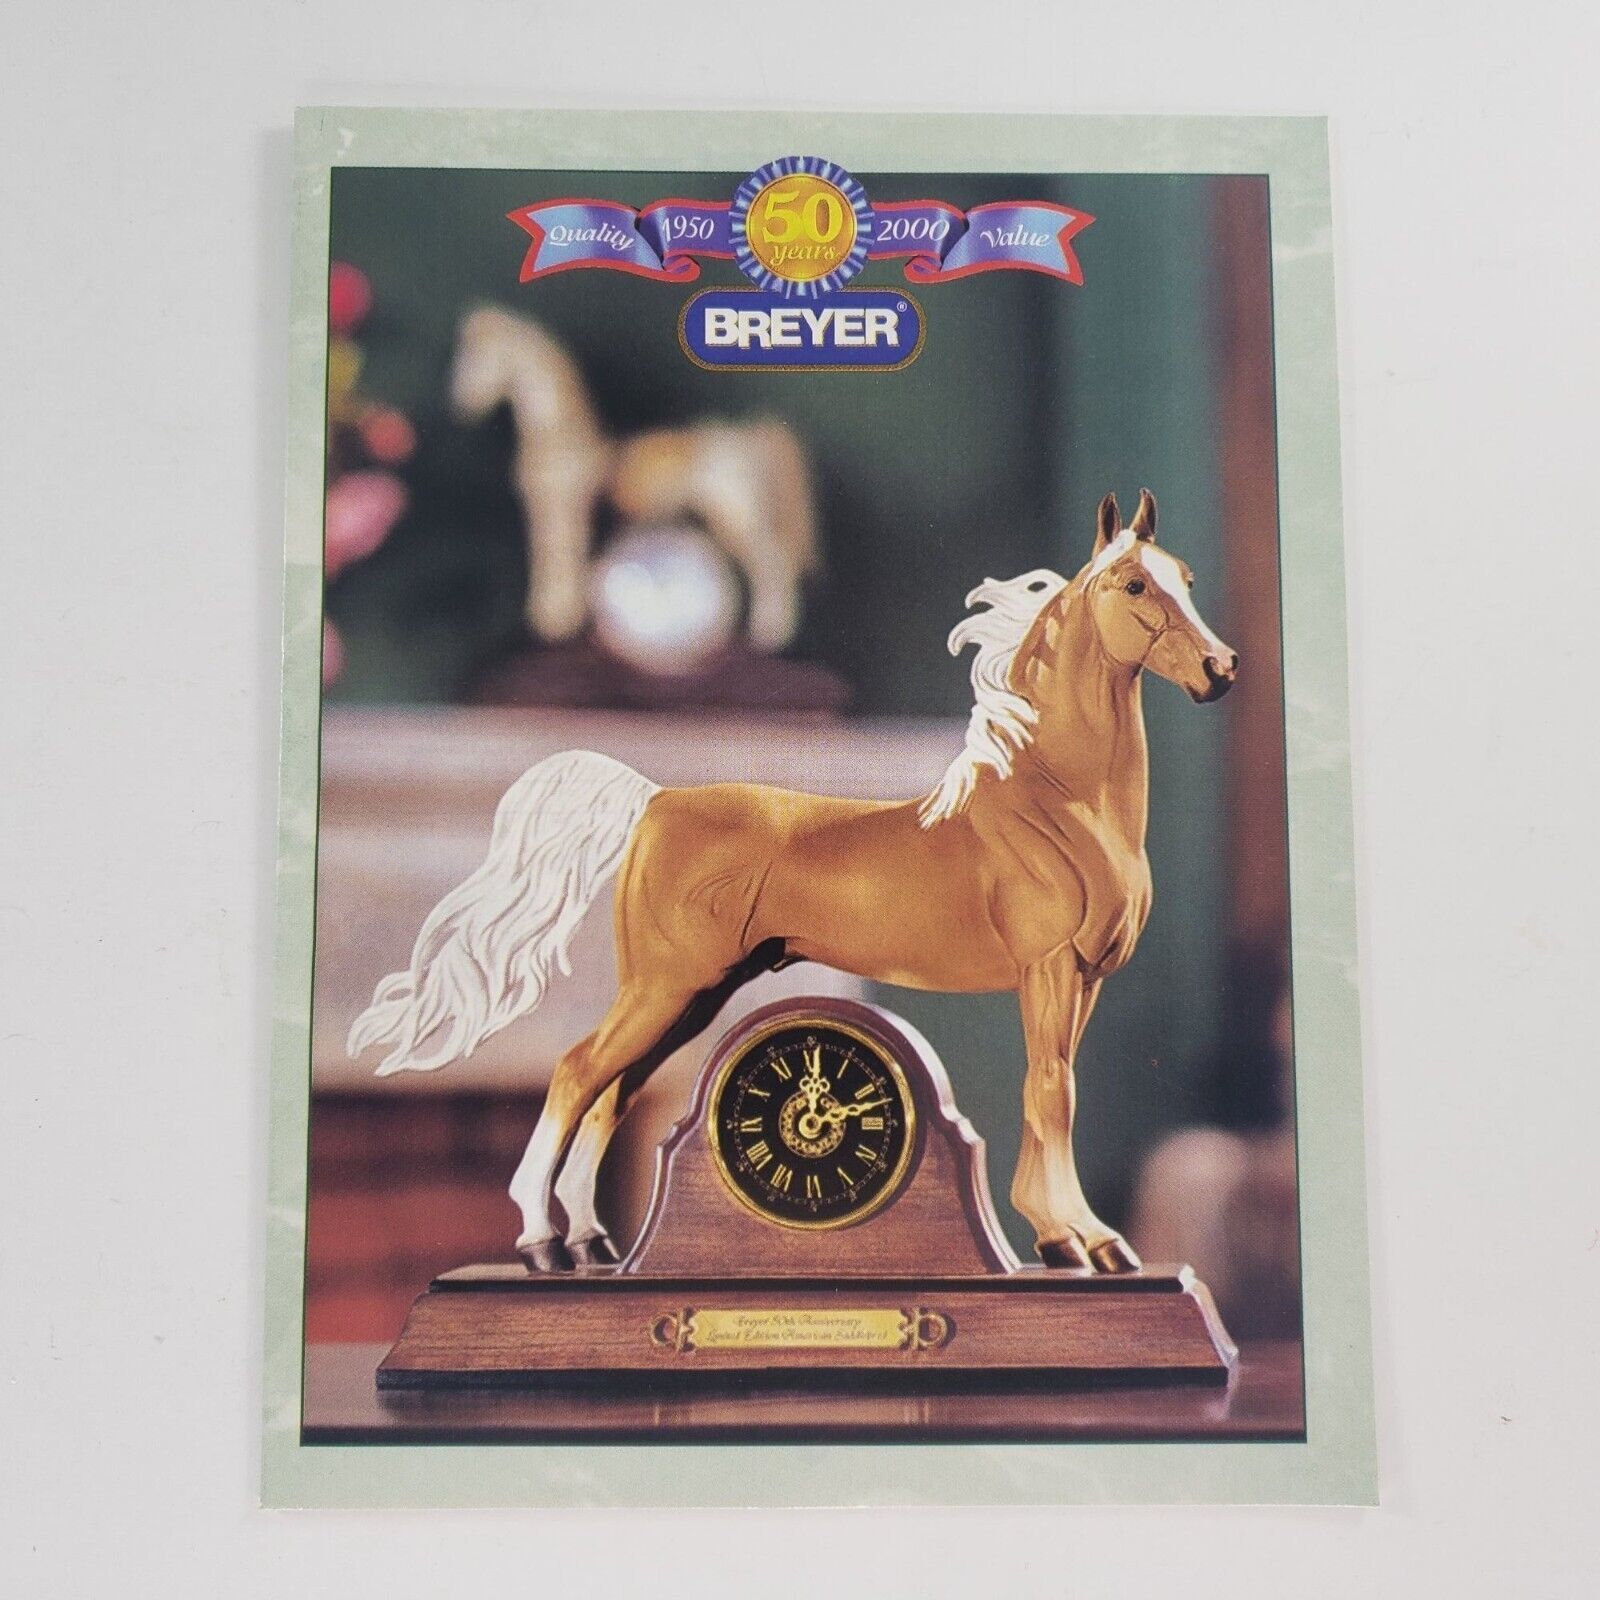 Breyer Model Horse Catalog Collector's Manual 2000 50 Years - $4.99